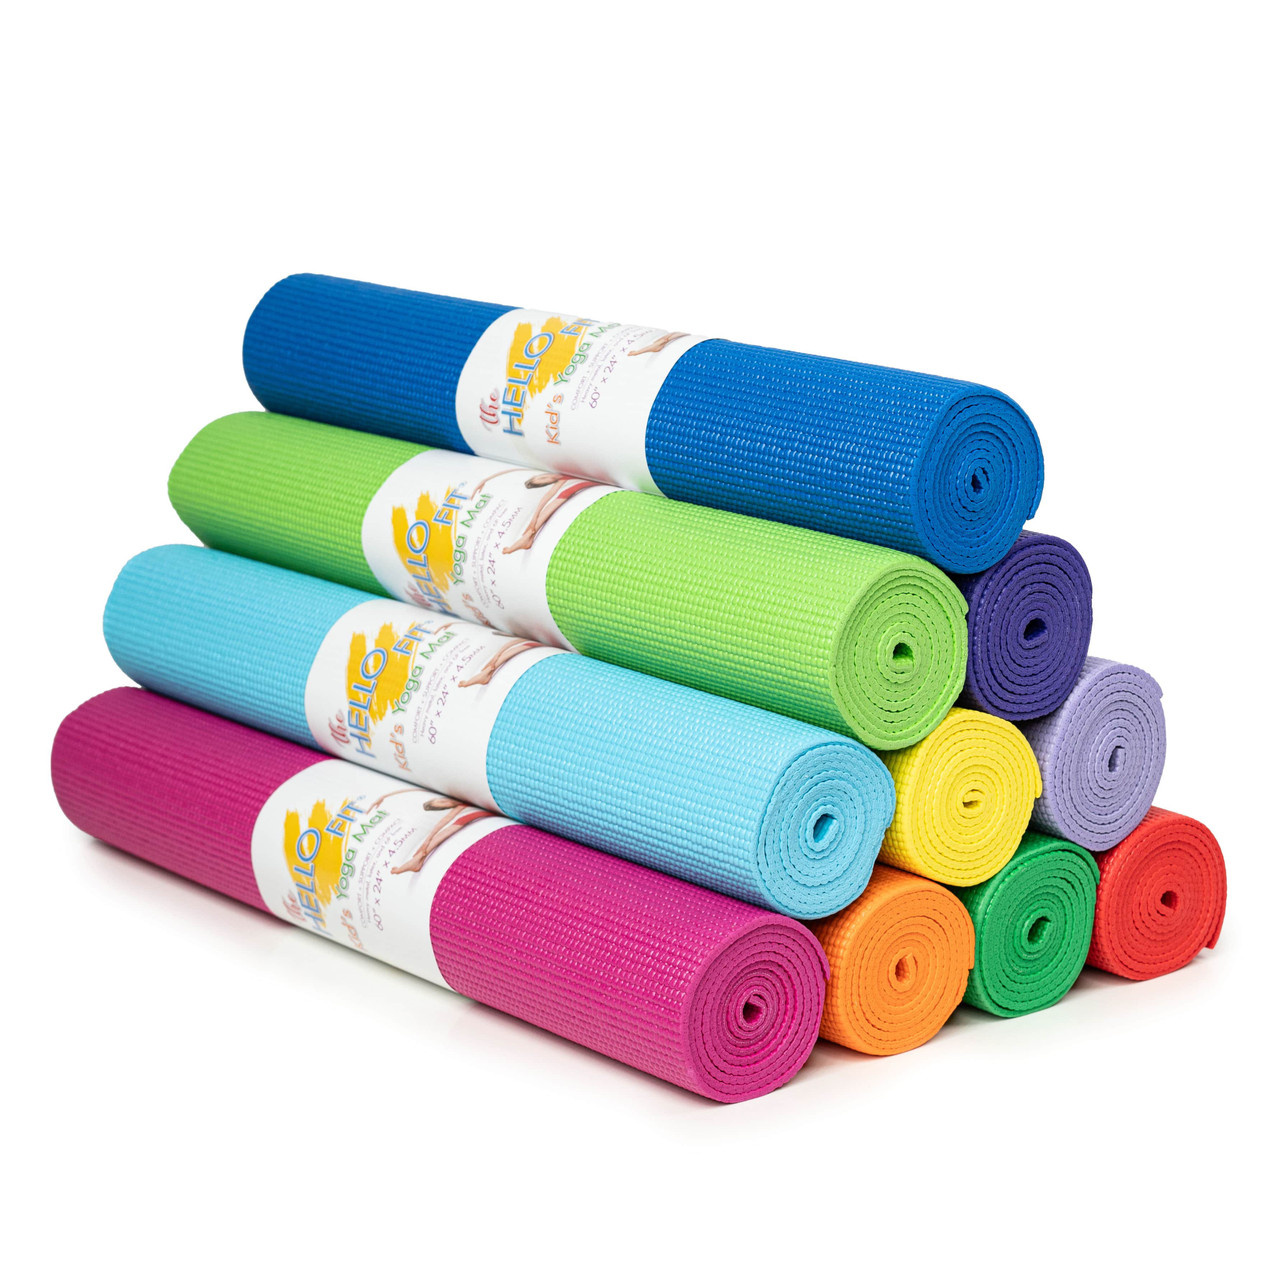  Hello Fit Kids Yoga Mats With Carrying Bags, 60 x 24  Exercise Mats, 4mm Non Slip Yoga Mat for Boys and Girls, Easy to Clean  Kid's Workout Mat for Schools